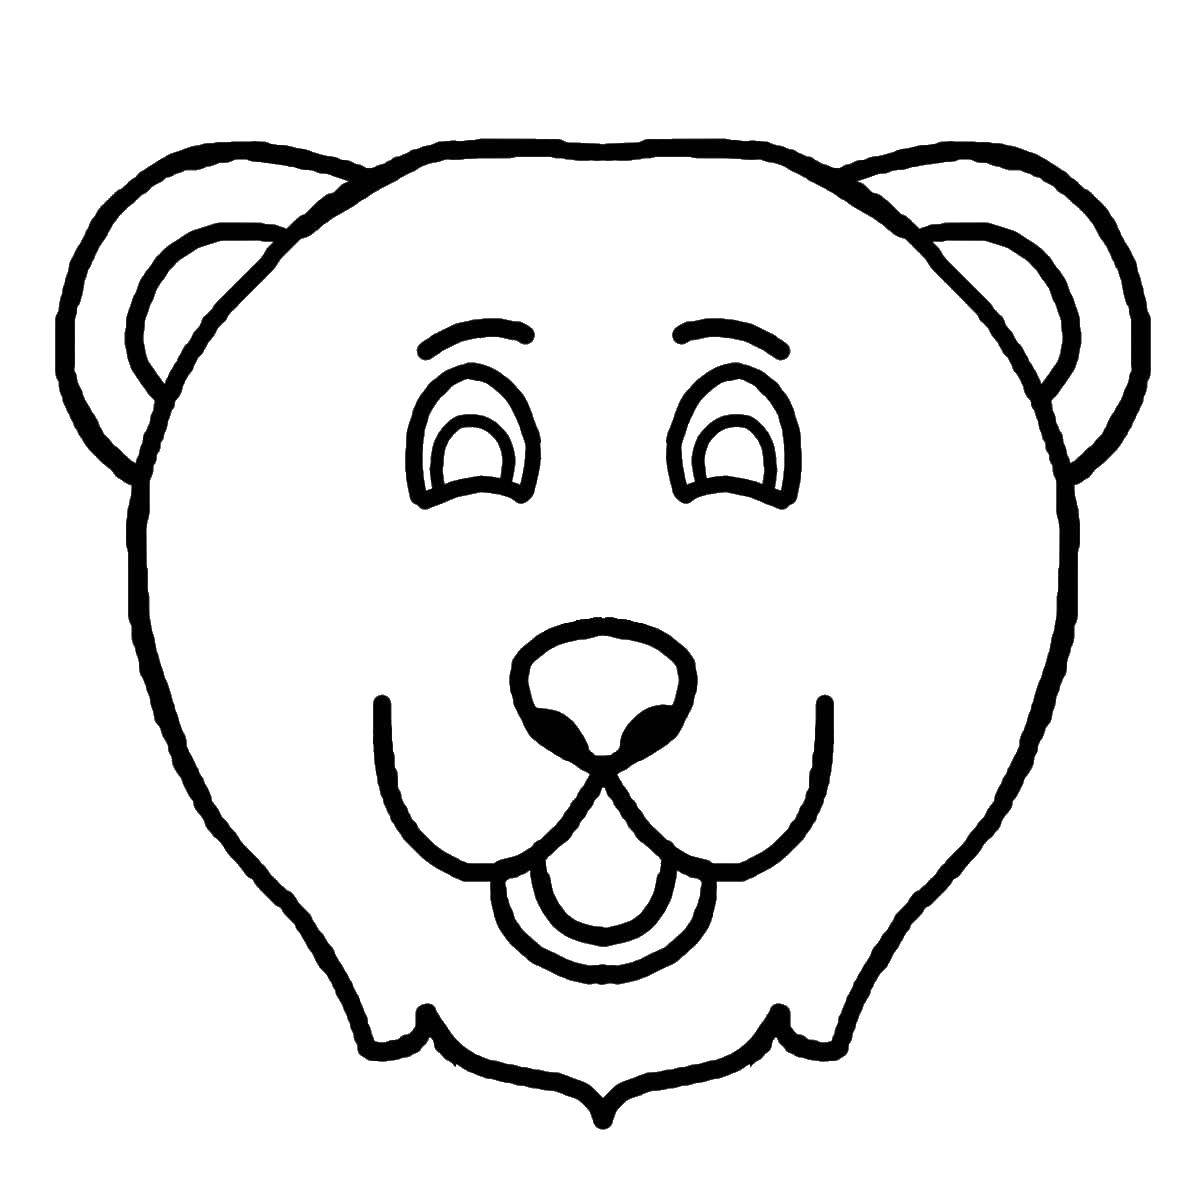 Coloring Bear. Category Animals. Tags:  animals, bears.